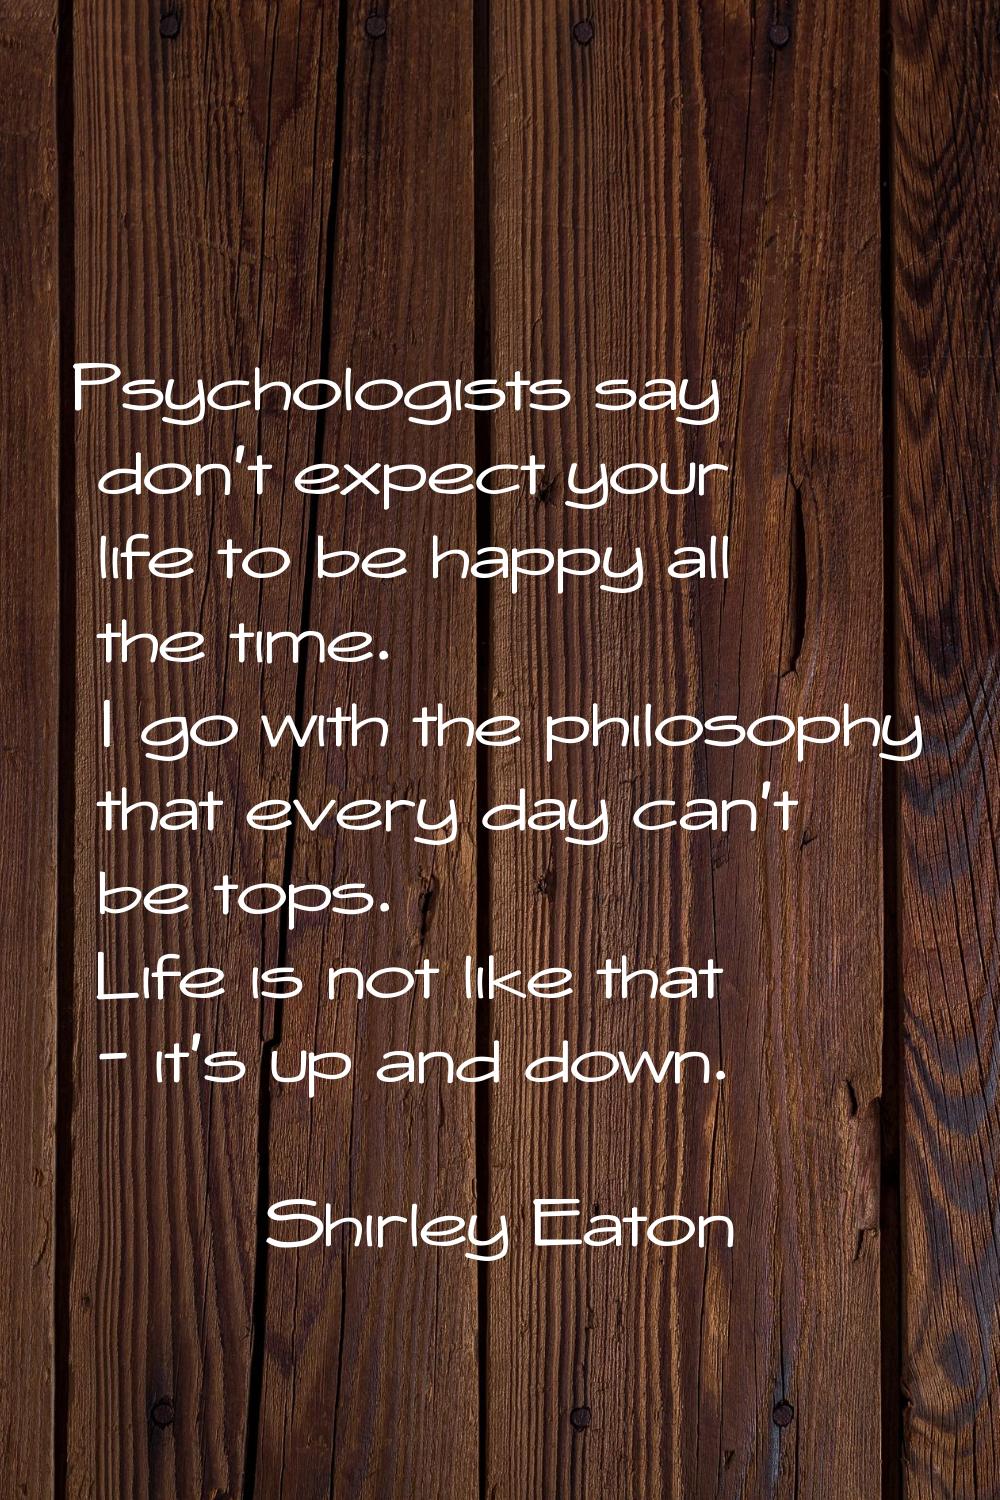 Psychologists say don't expect your life to be happy all the time. I go with the philosophy that ev